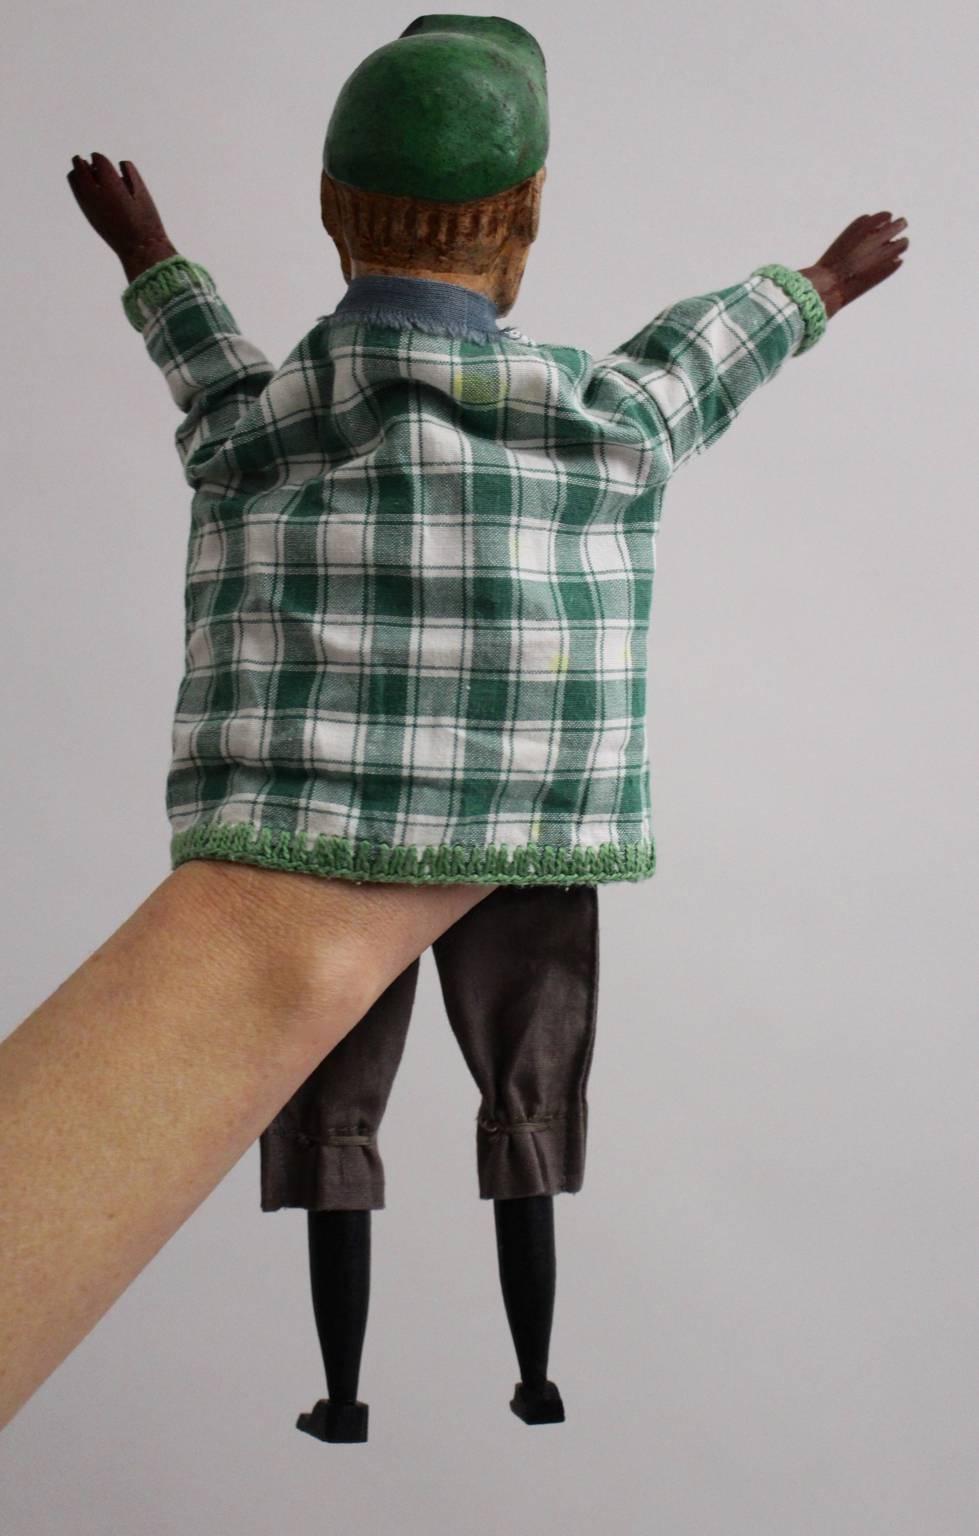 Art Deco Vintage Glove Puppetry, circa 1920 For Sale 3